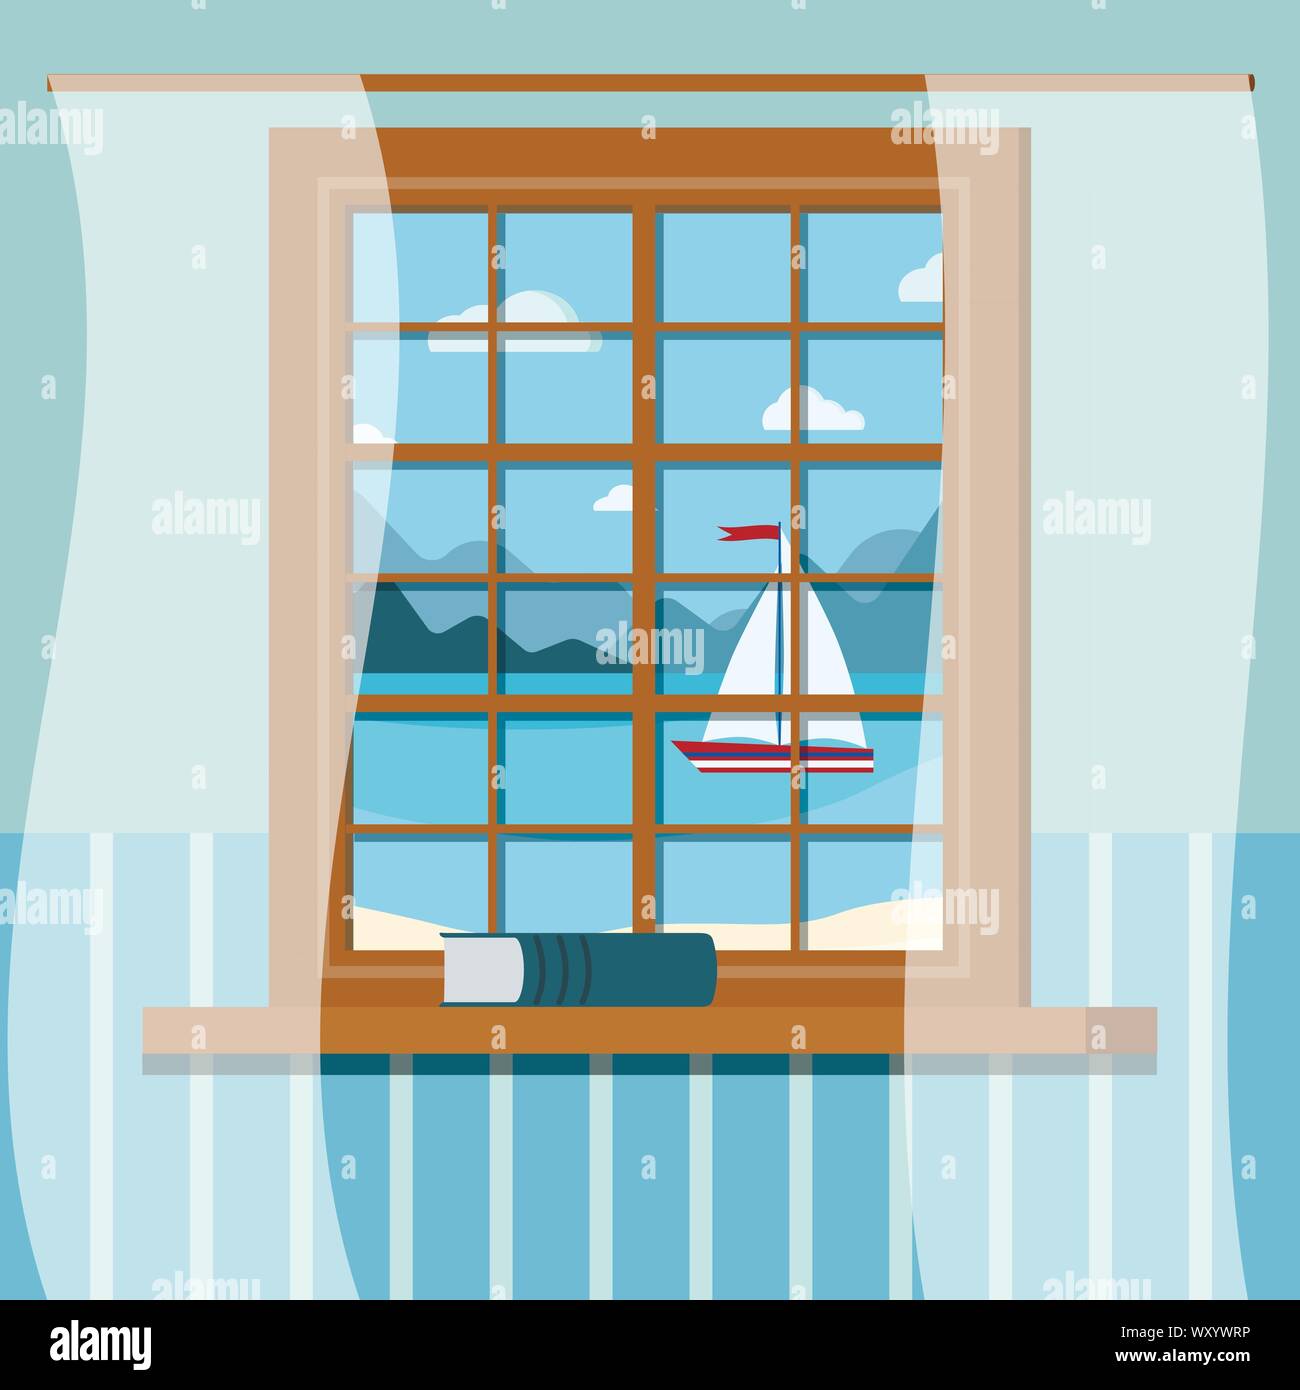 Wooden room window frame with book and curtains in cartoon flat style. Stock Vector